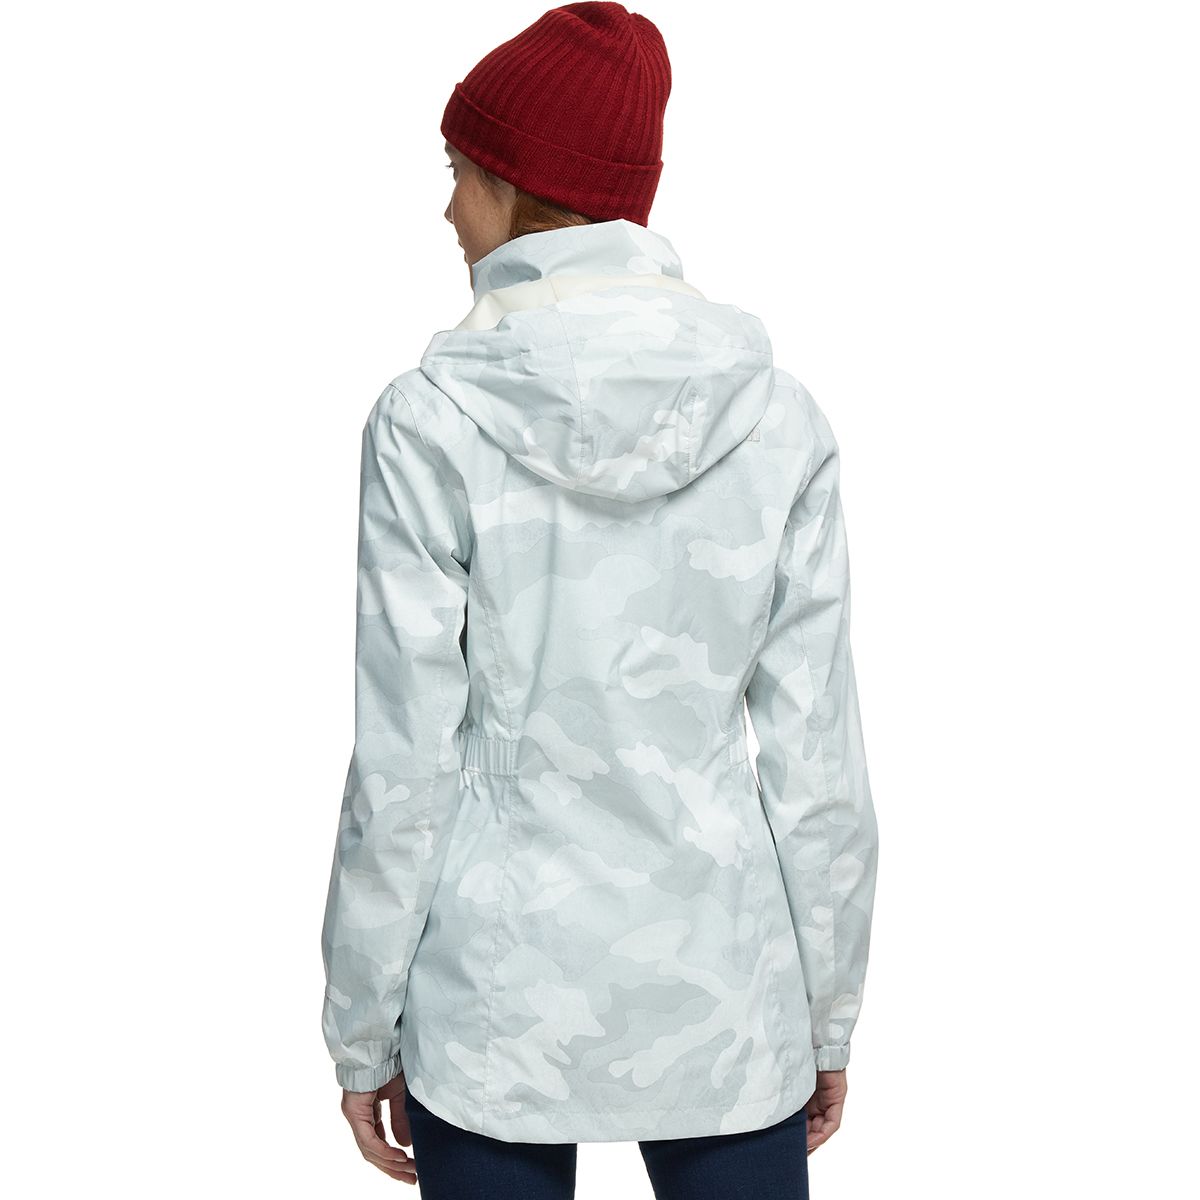 The North Face Resolve II Parka - Women's | Backcountry.com